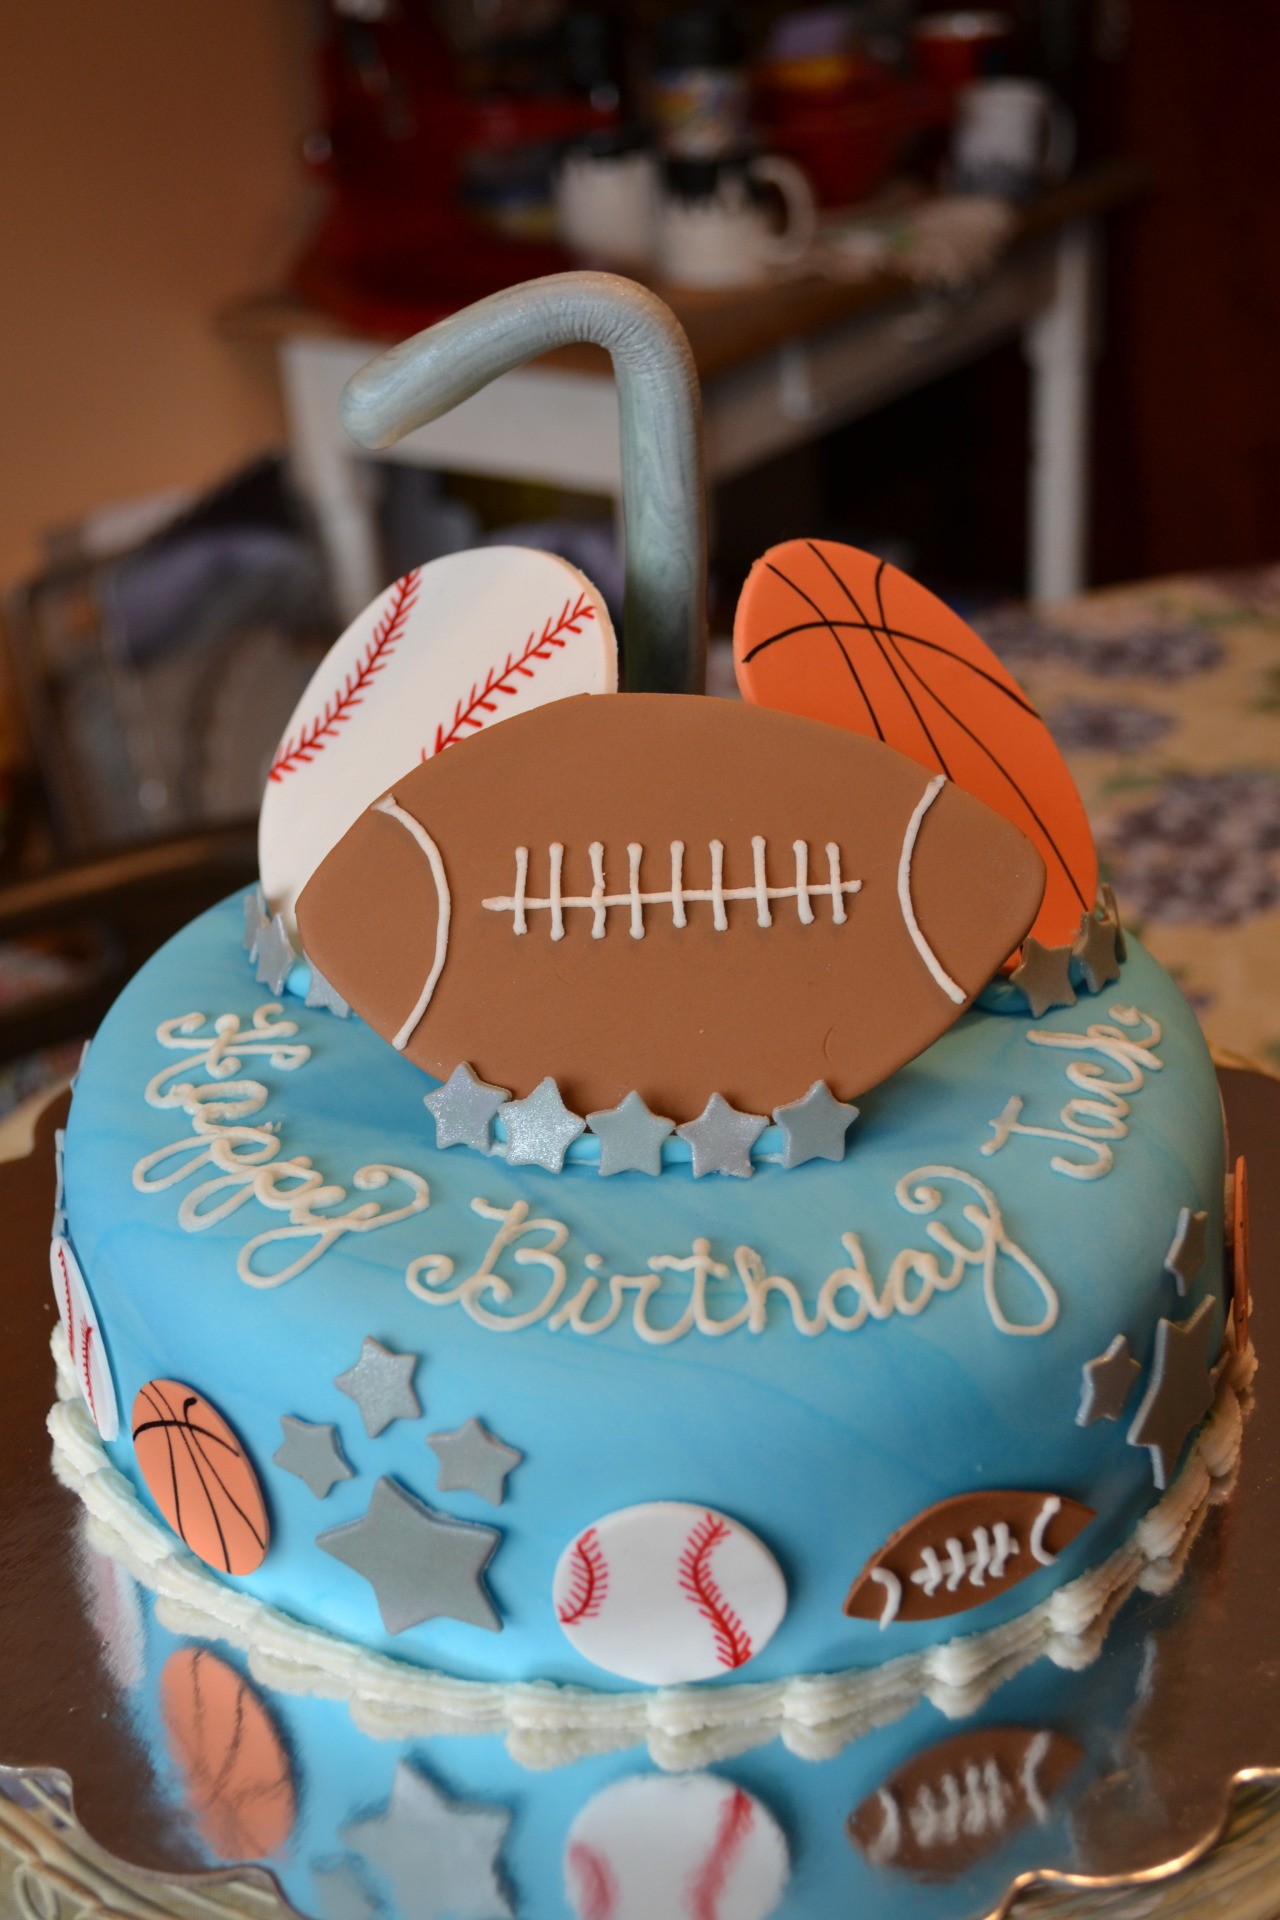 Sports Birthday Cakes
 The Crocheted Cupcake Sports themed birthday cake and